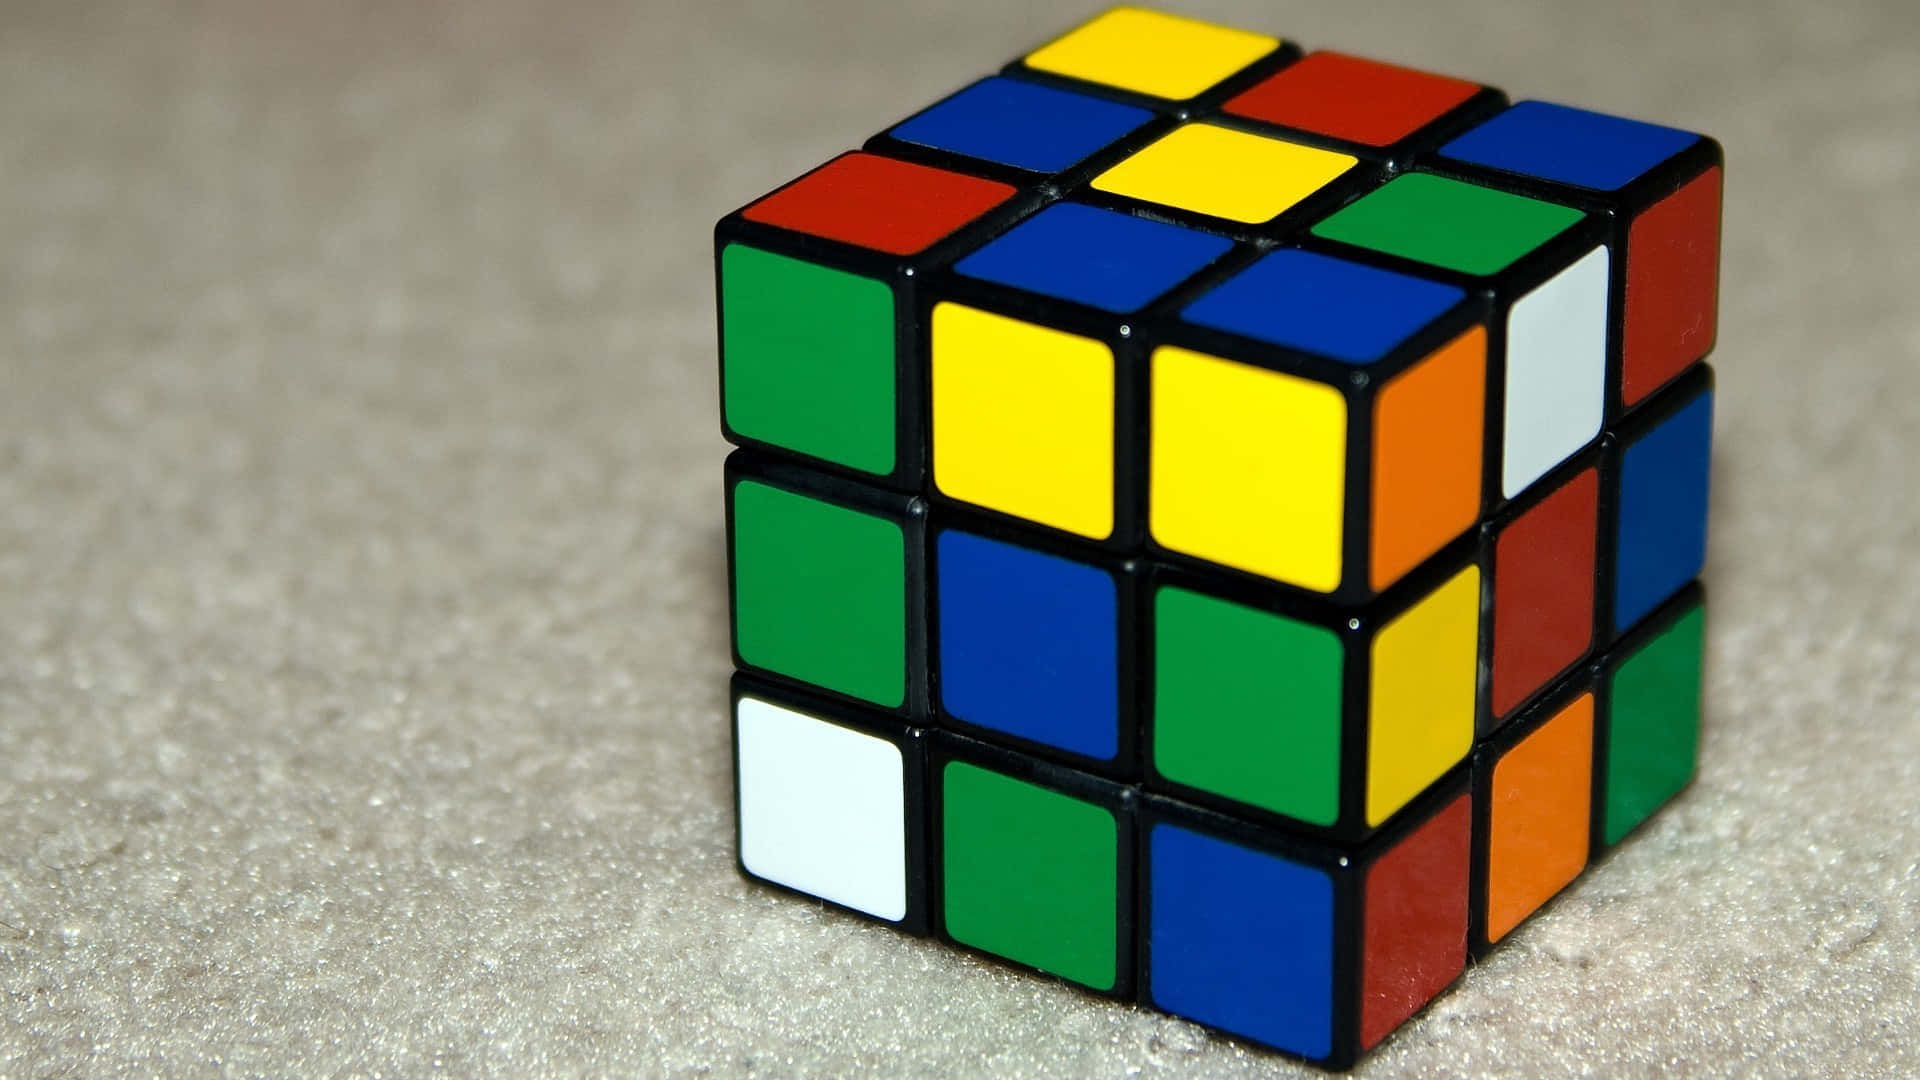 A Rubik's Cube Is Sitting On A Carpet